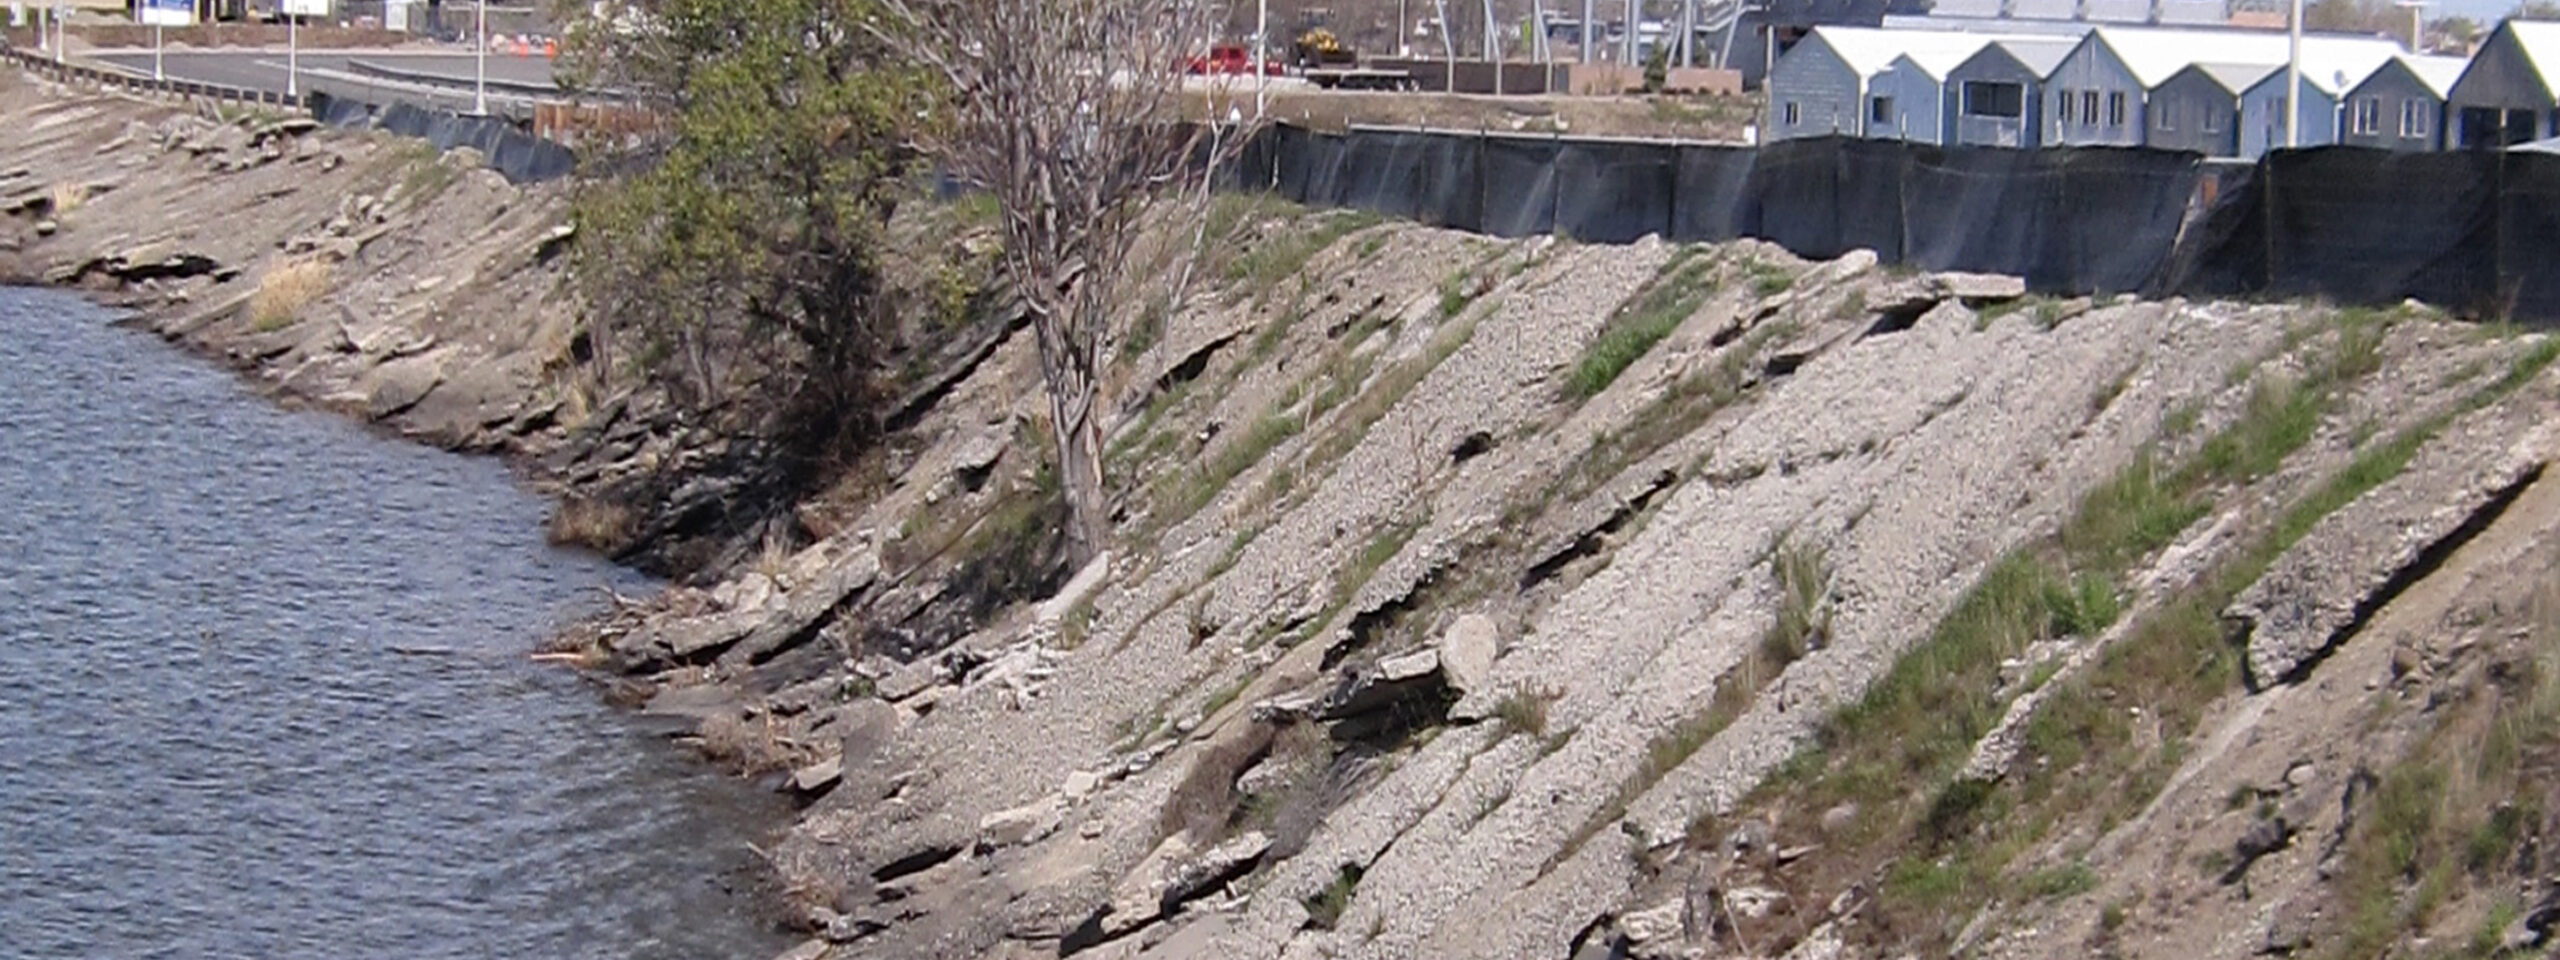 The west causeway shoreline before the start of the 2010 - 2011 improvements project.